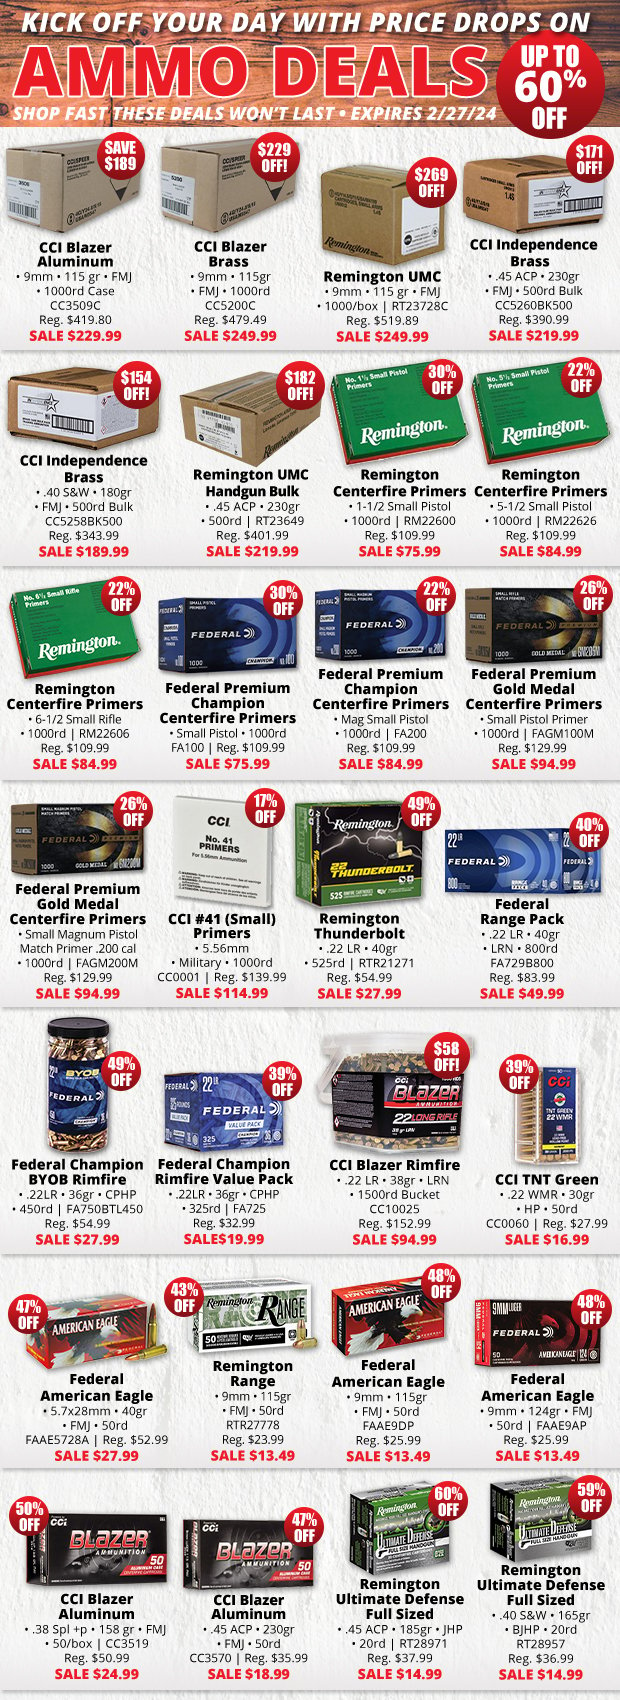 Price Drops on Ammo Deals Up to 60% Off!